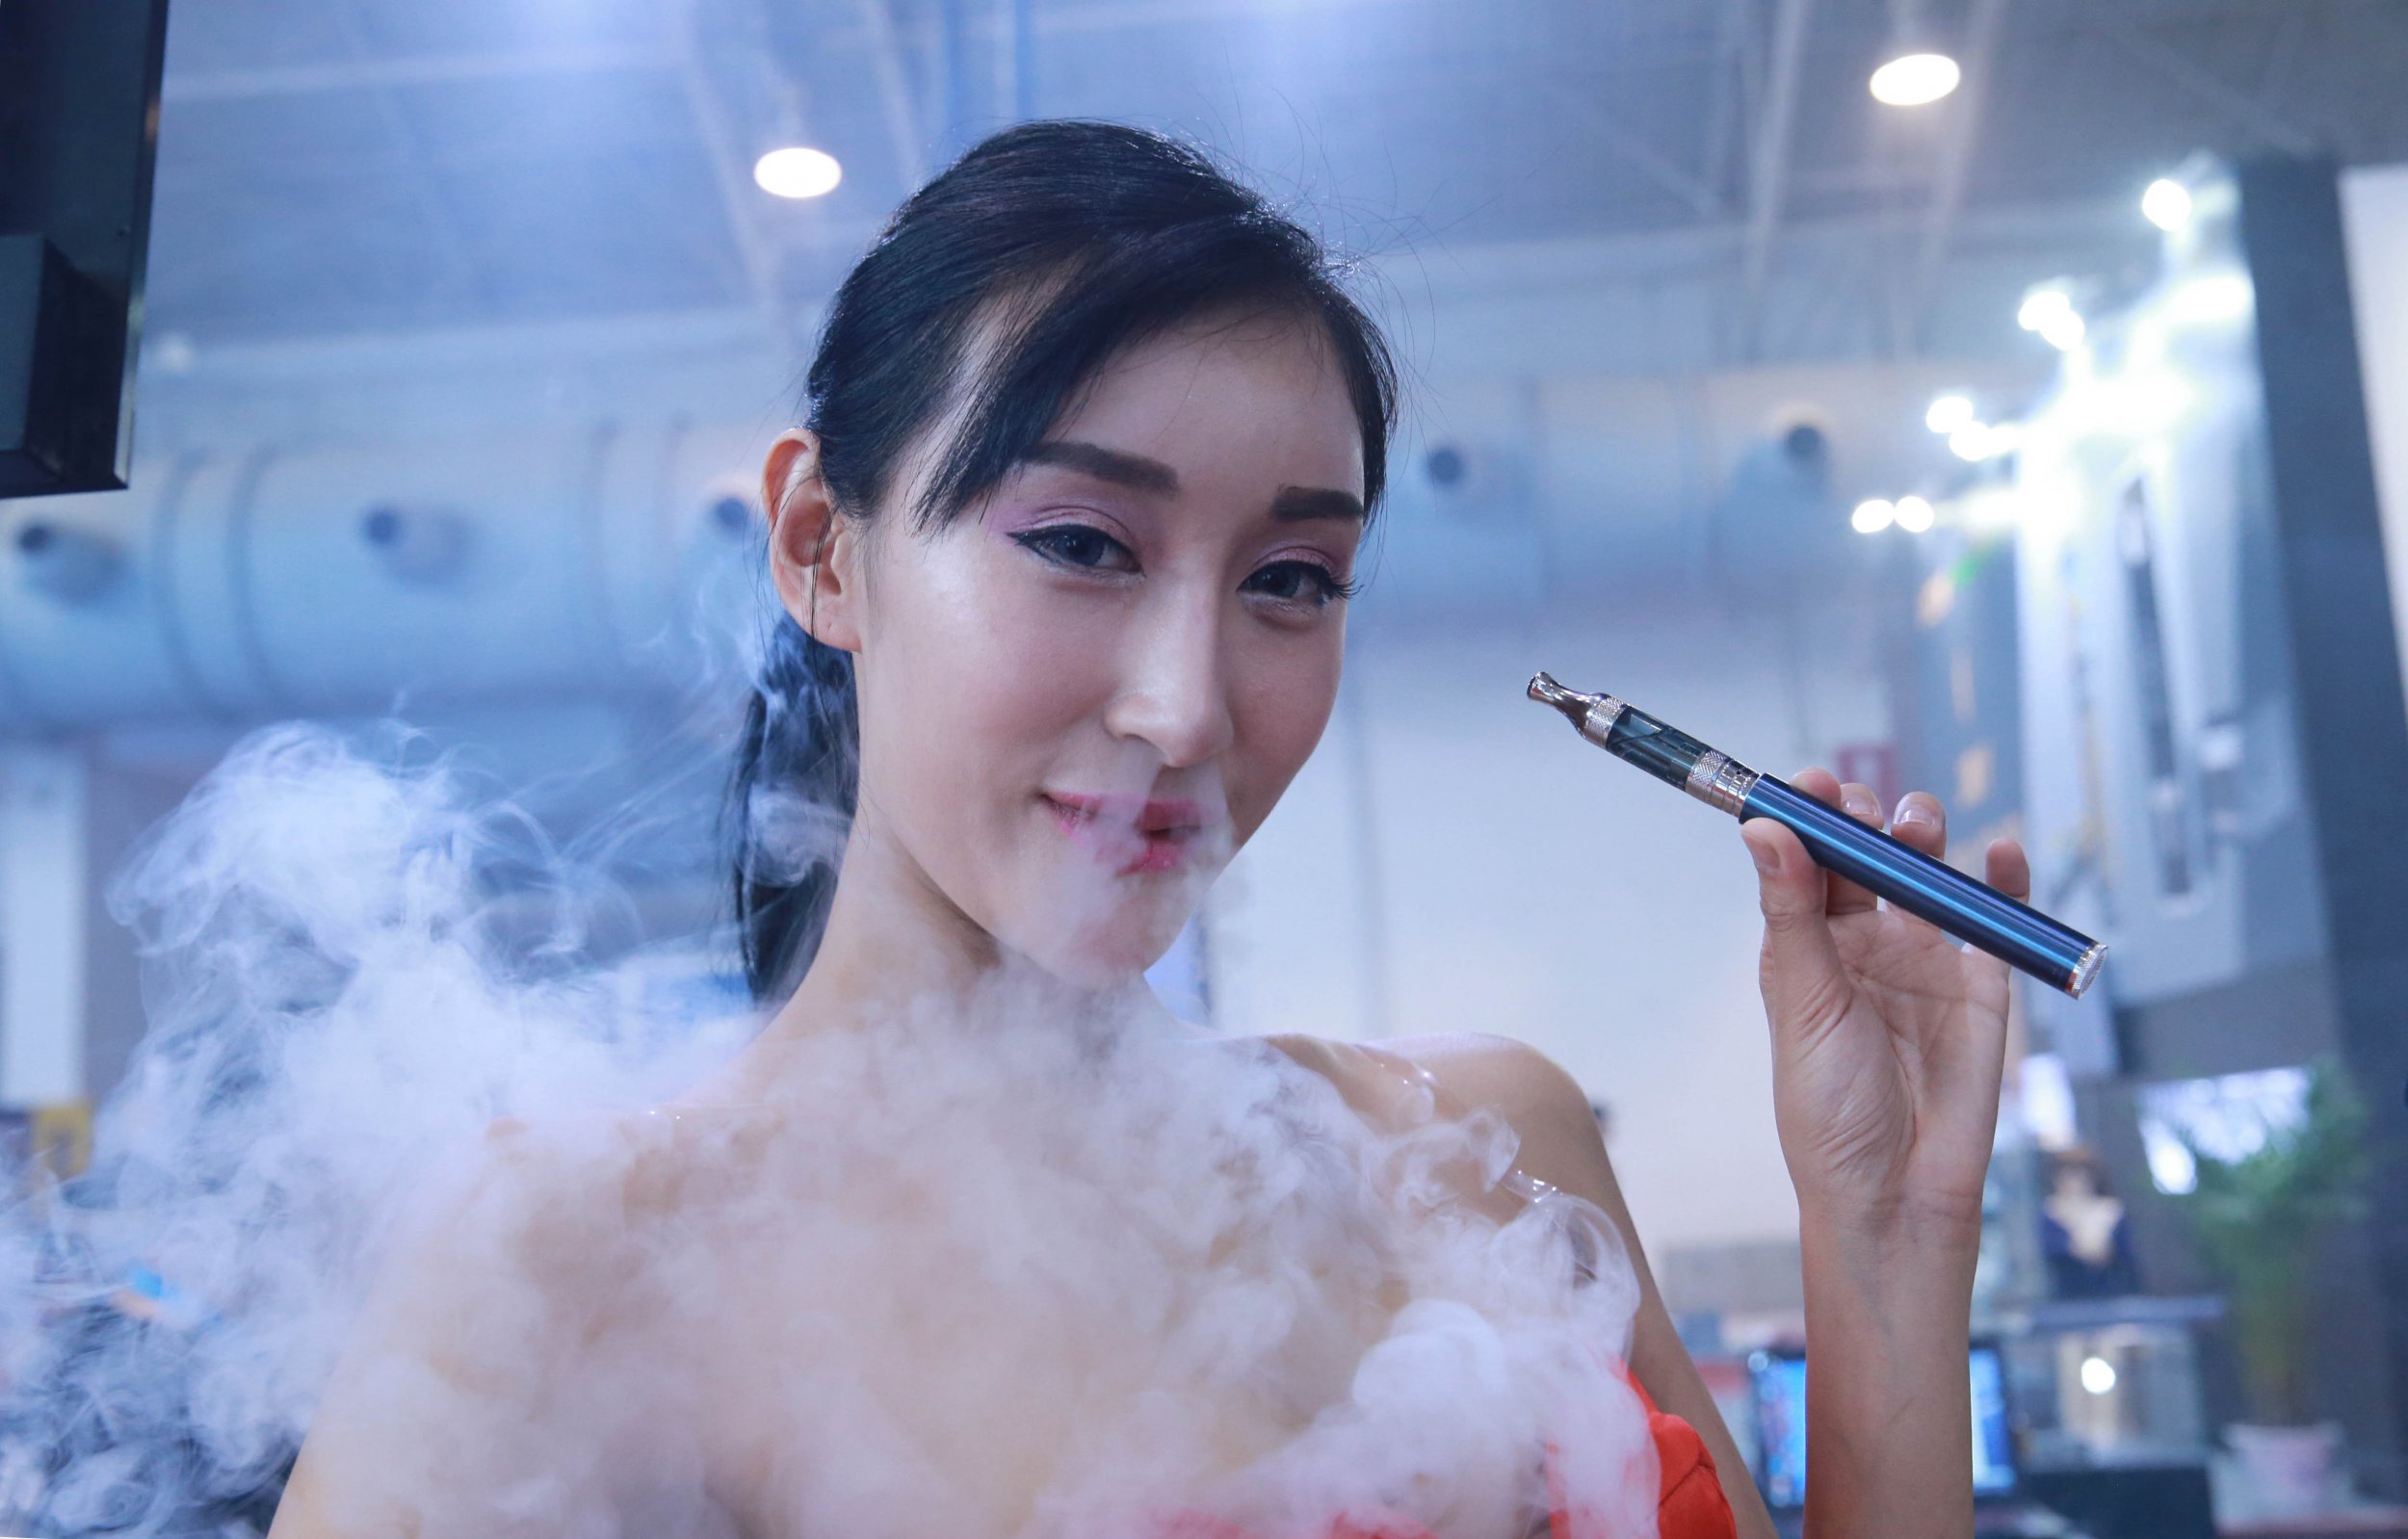 Laws restricting sales of e-cigarettes to minors led to an increase in smok...